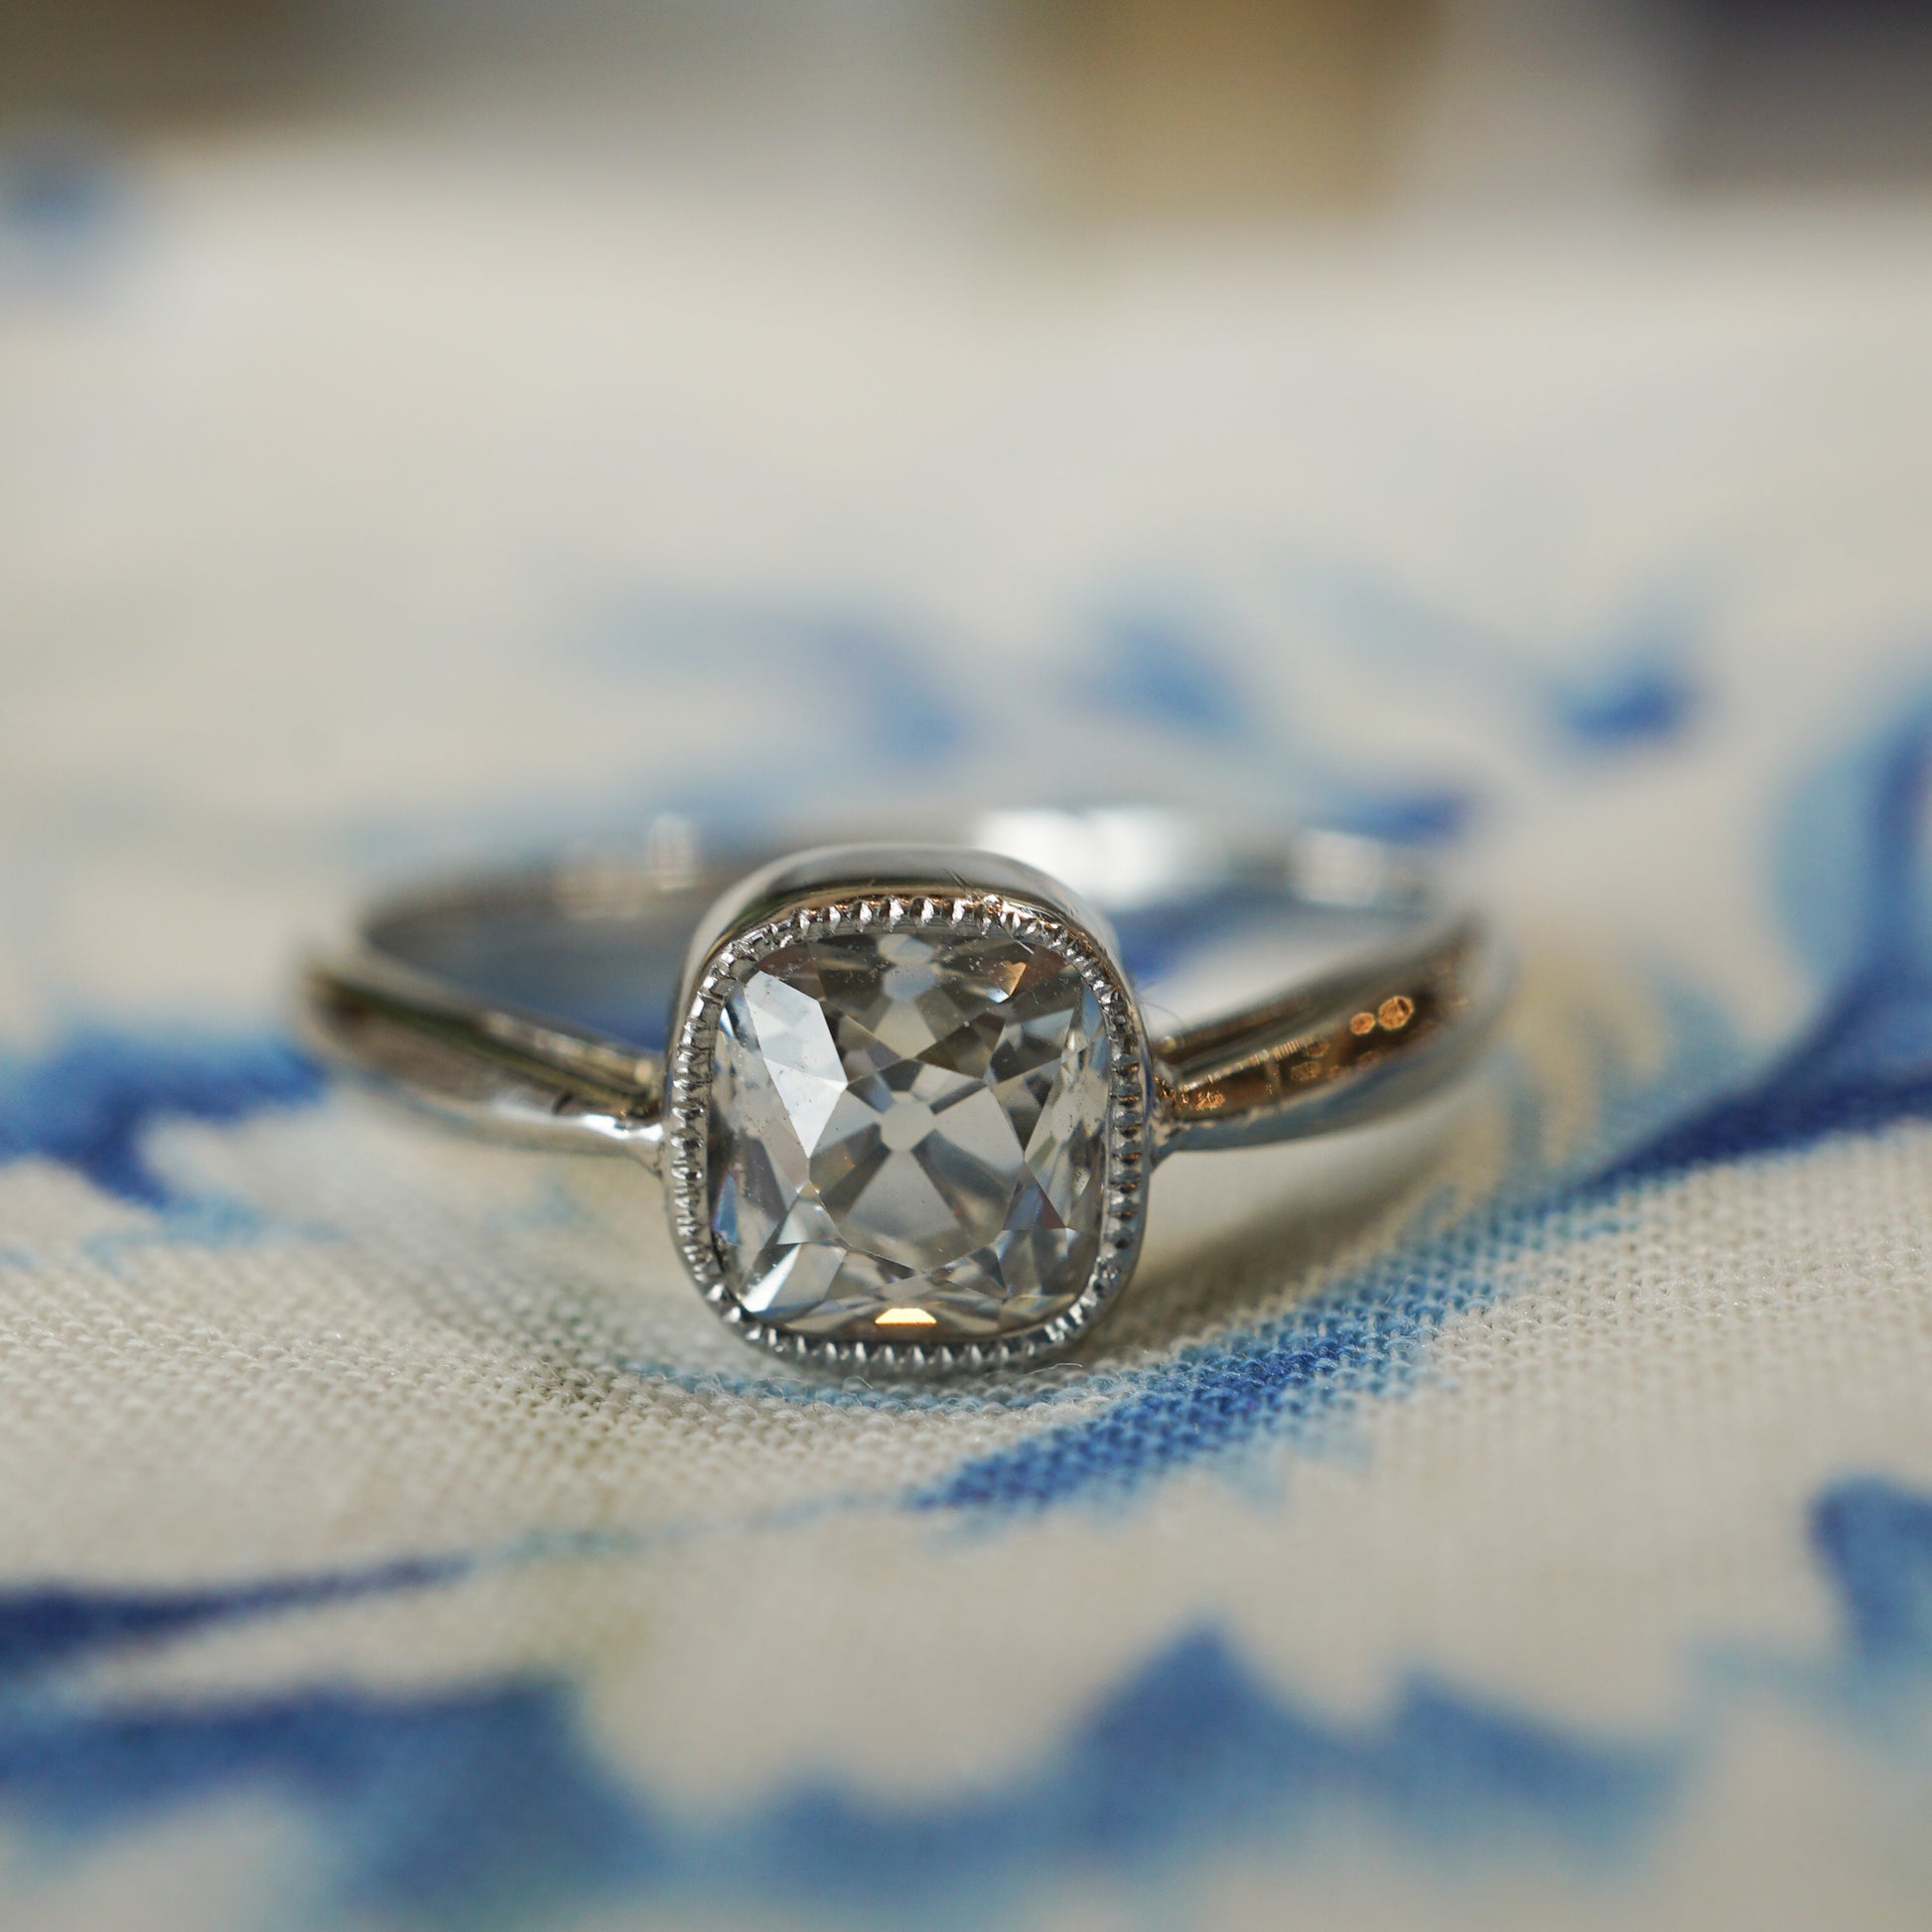 Antique Cushion Cut Diamond Engagement Ring in 18k White Gold